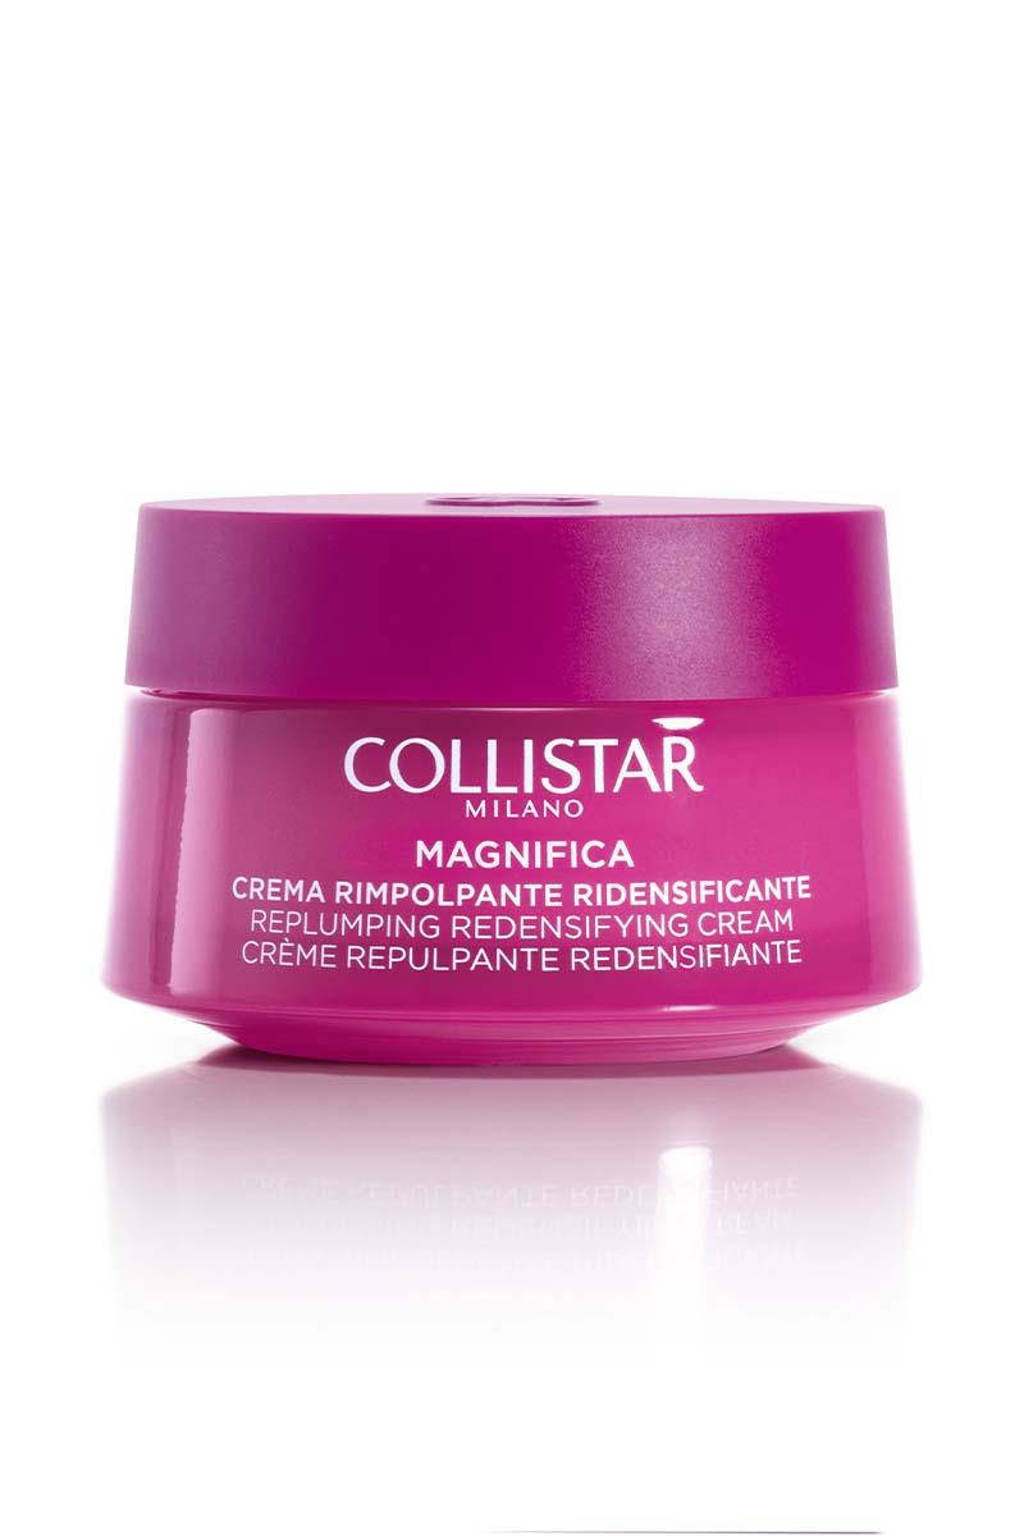 Collistar Magnifica Replumping Redensifying Cream Face And Neck